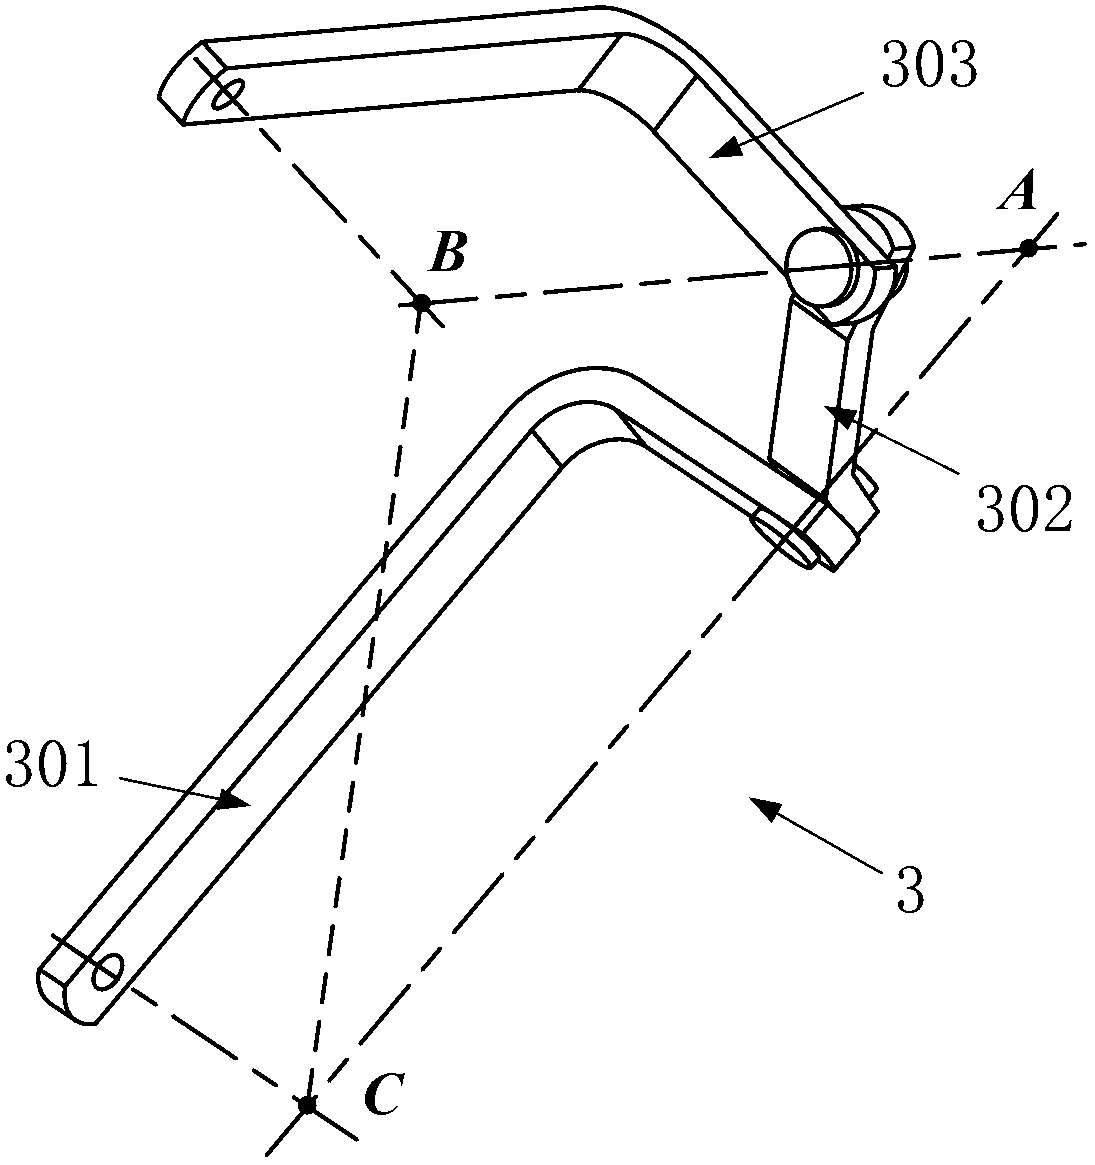 Two-freedom-degree parallel-connection rotation mechanism with spherical surface pure-rolling property